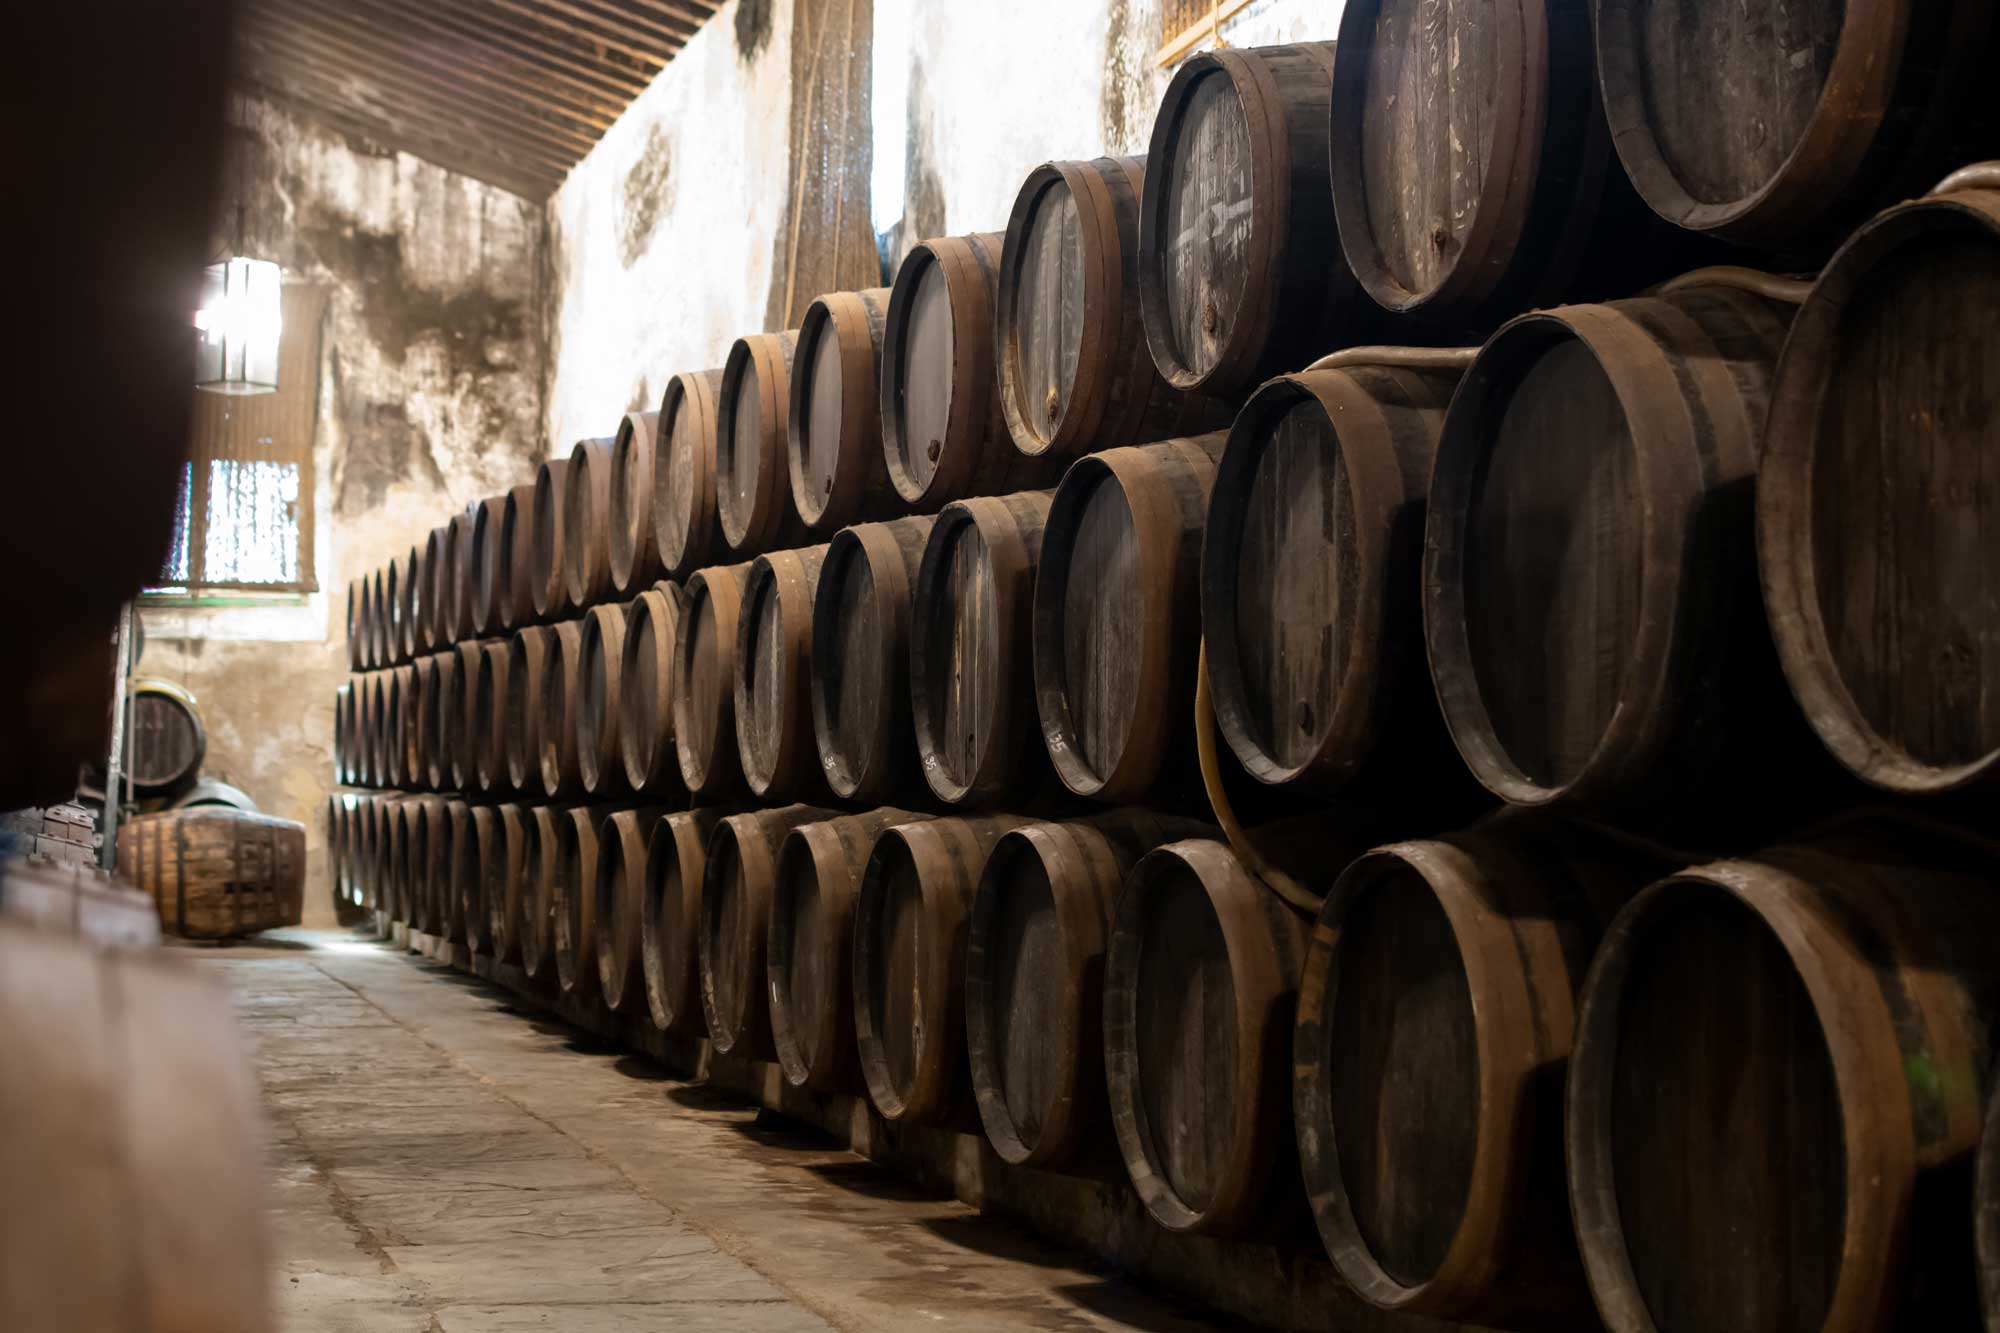 How do sherry casks affect Scotch whisky, and why are they used?